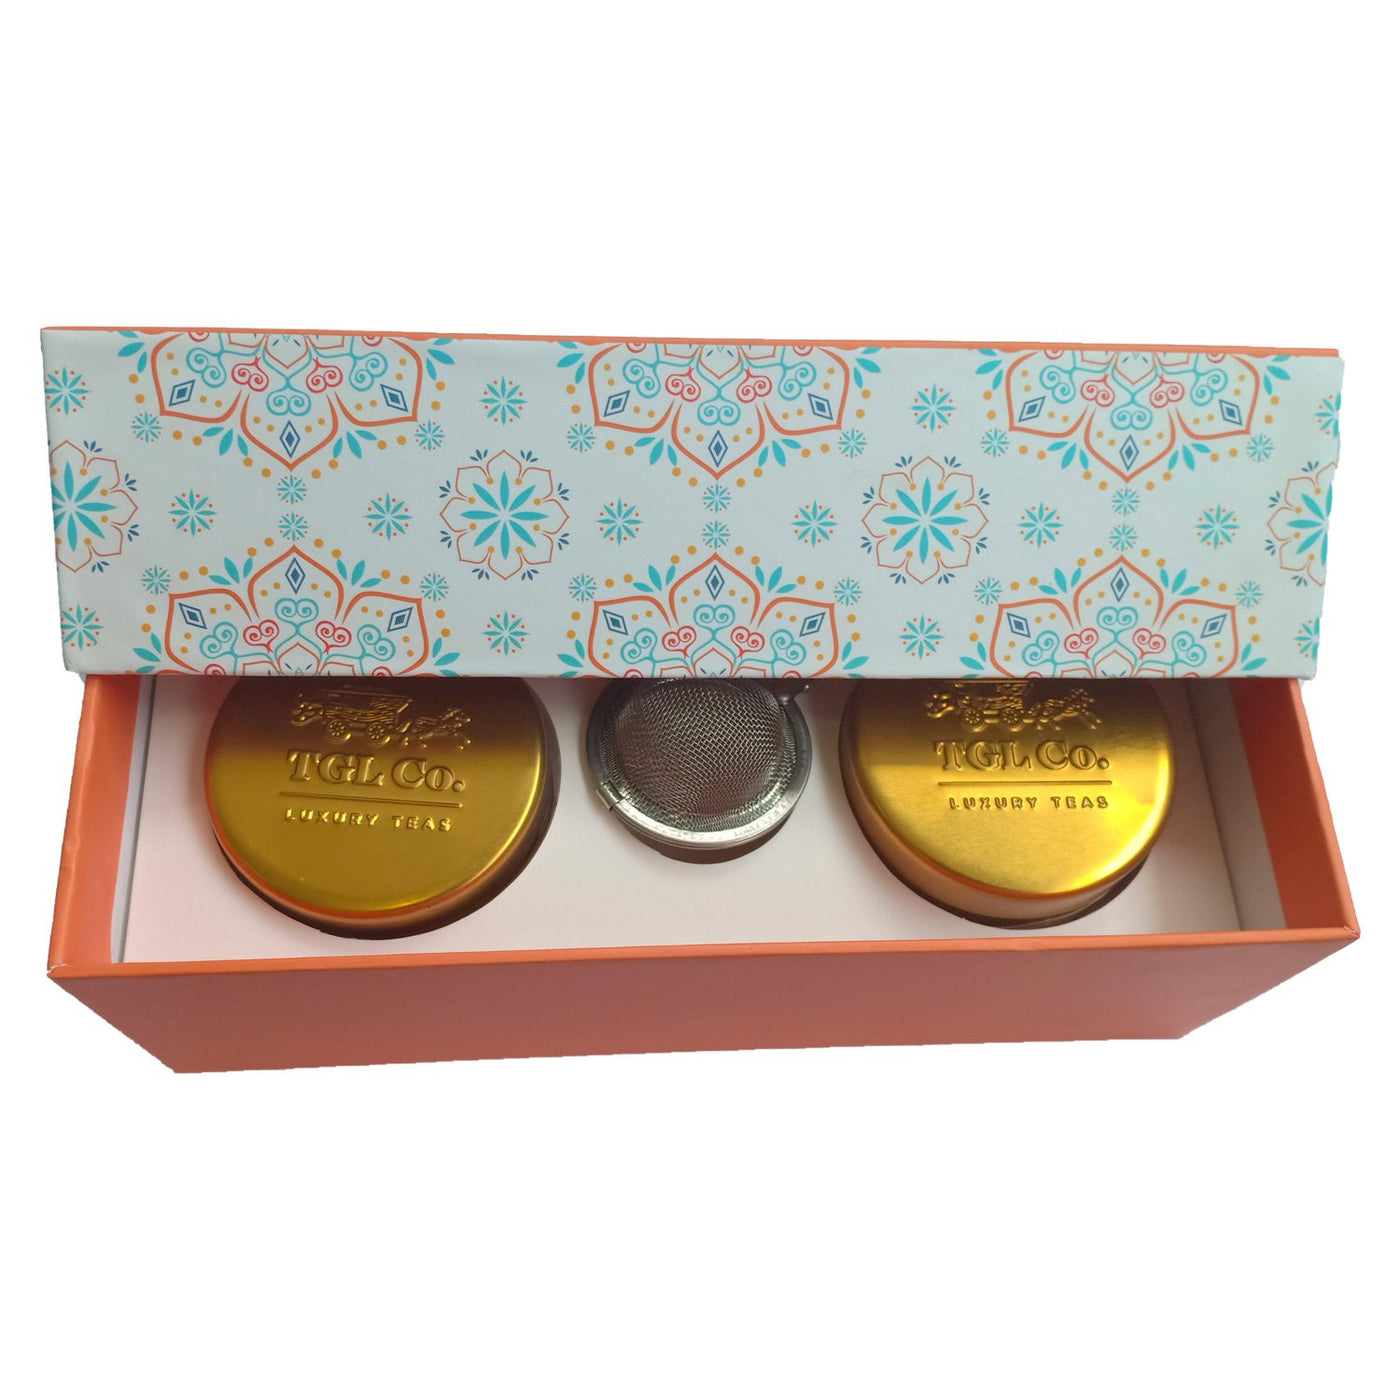 Crafted Celebrations - Assorted Tea Gift Box - Pack of 3